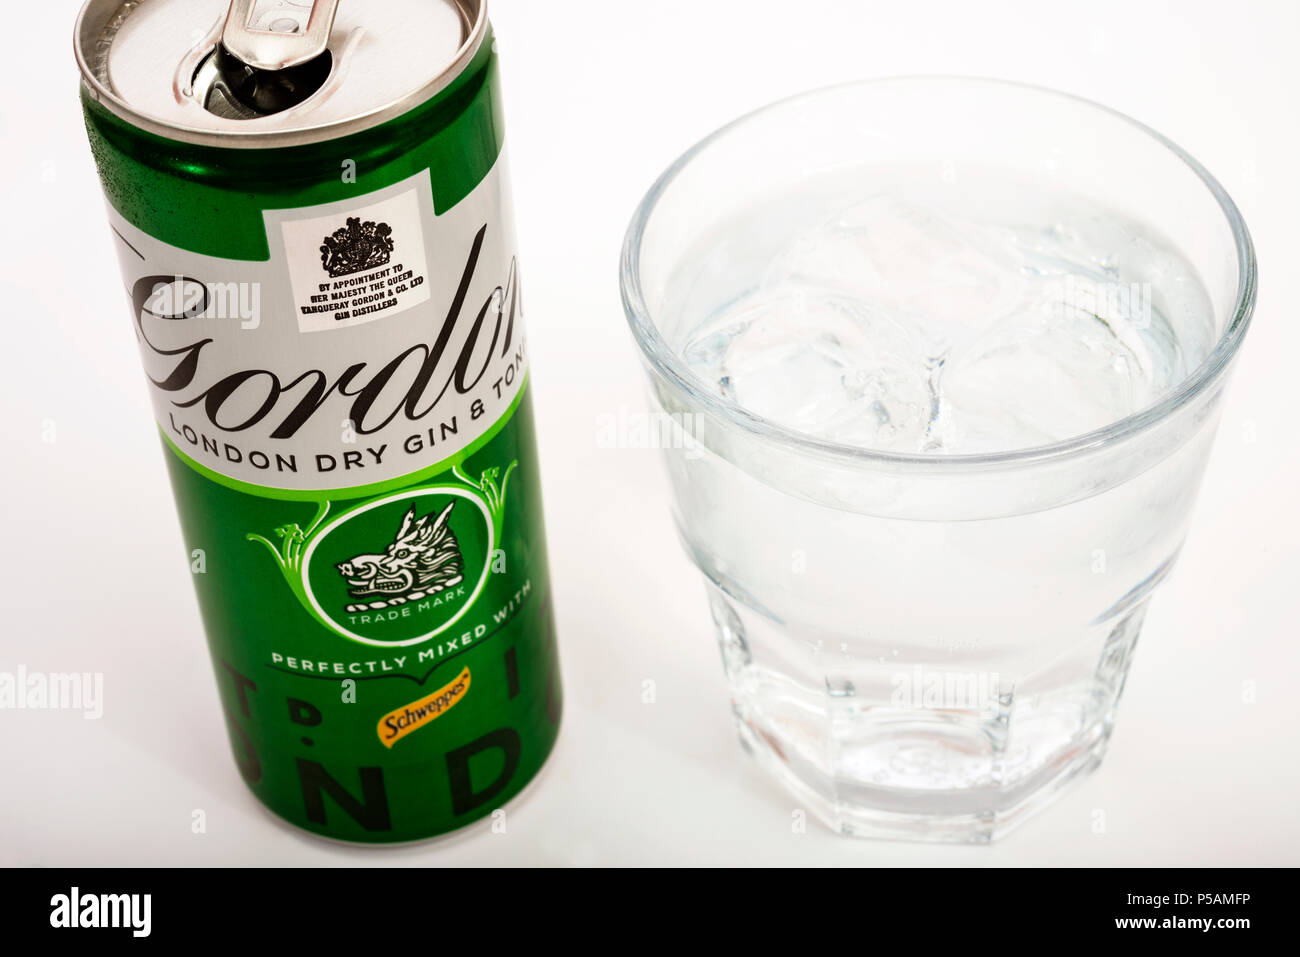 Gordons dry gin and tonic Stock Photo